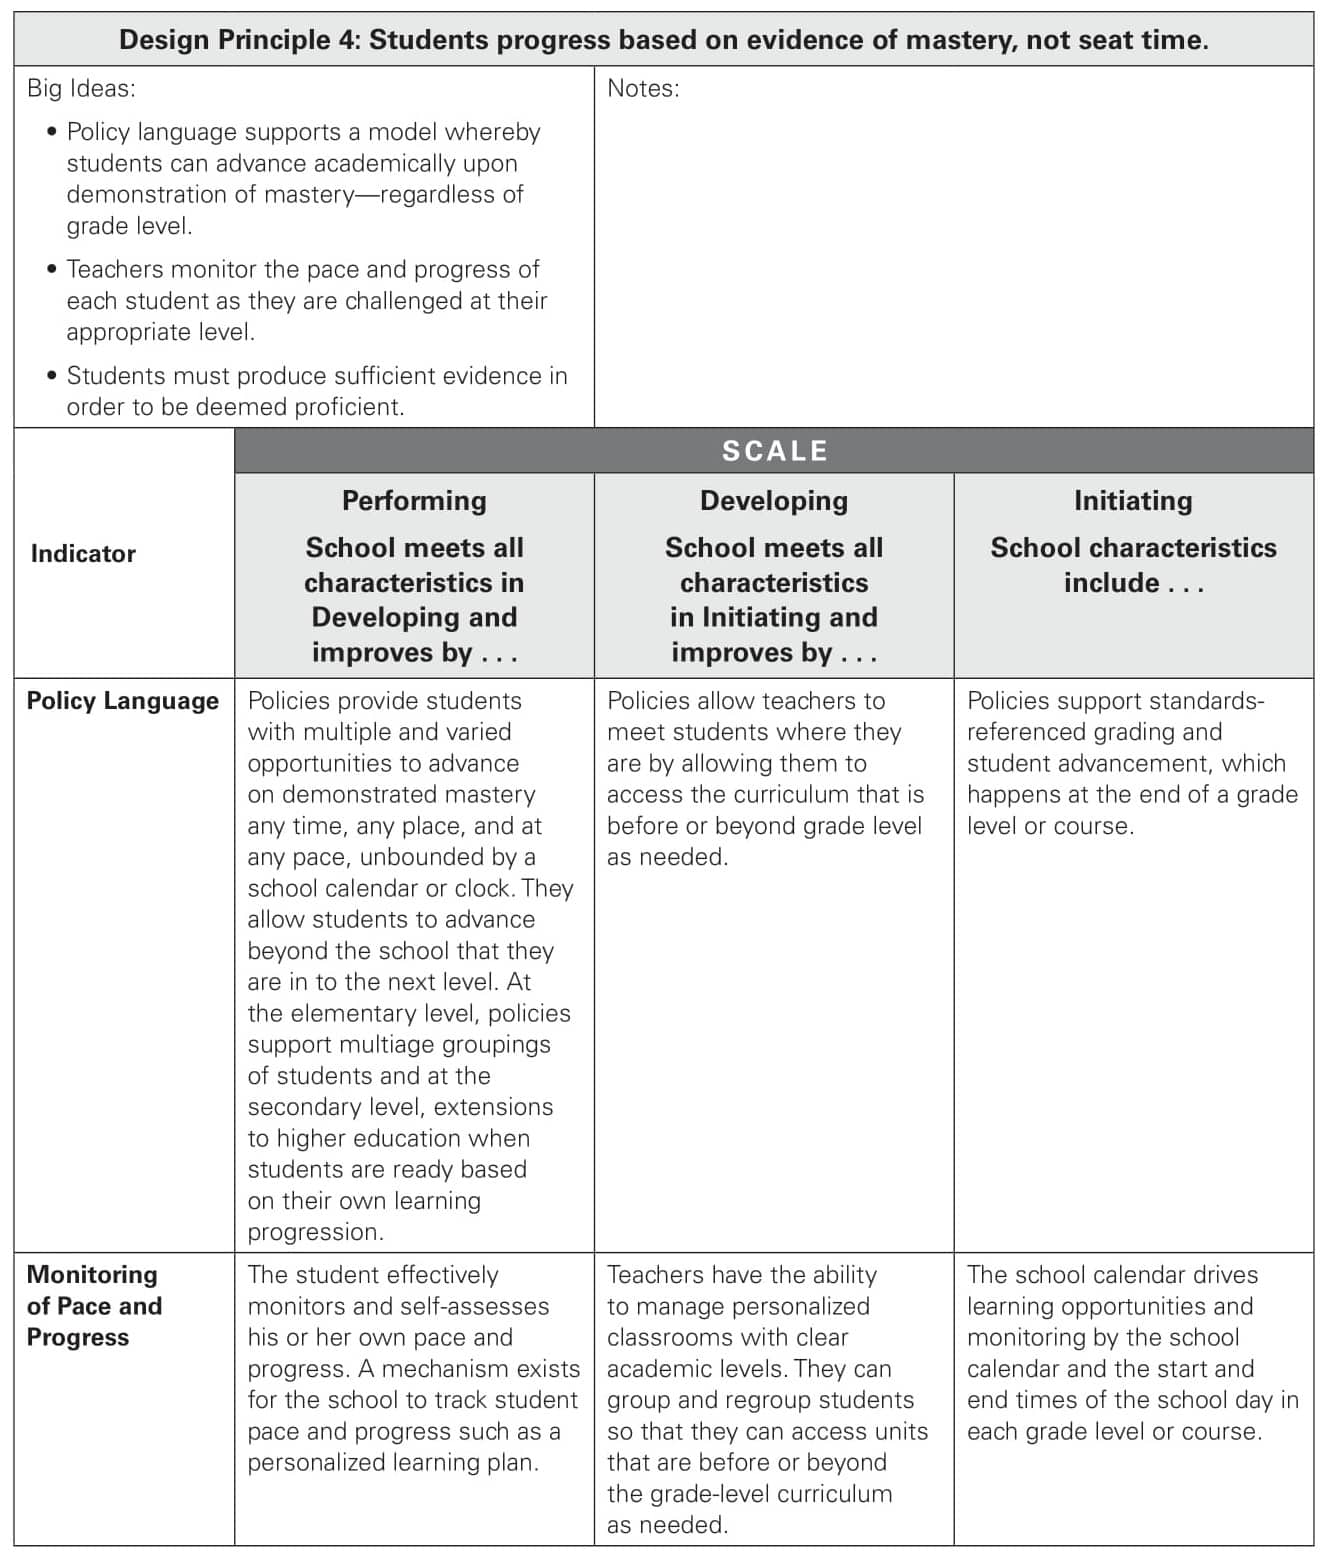 Rubric for Advancing Upon Demonstrated Mastery